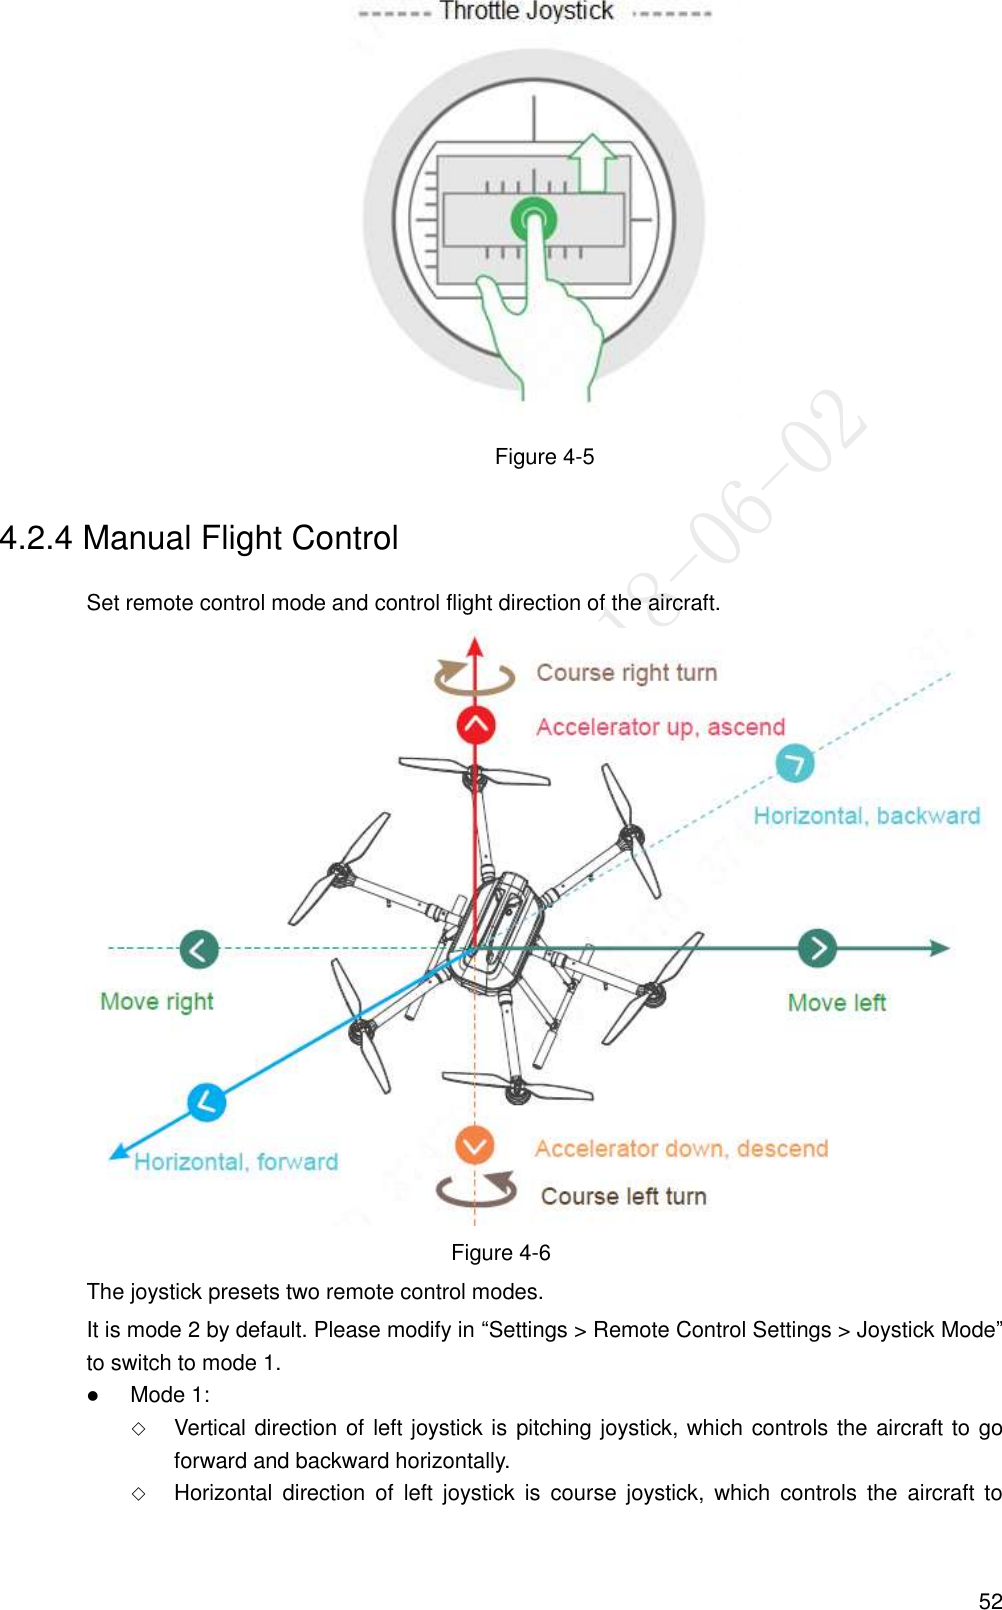  52  Figure 4-5 4.2.4 Manual Flight Control Set remote control mode and control flight direction of the aircraft.  Figure 4-6 The joystick presets two remote control modes. It is mode 2 by default. Please modify in “Settings &gt; Remote Control Settings &gt; Joystick Mode” to switch to mode 1.  Mode 1:  Vertical direction of left joystick is pitching joystick, which controls the aircraft to go forward and backward horizontally.  Horizontal  direction  of  left  joystick  is  course  joystick,  which  controls  the  aircraft  to 